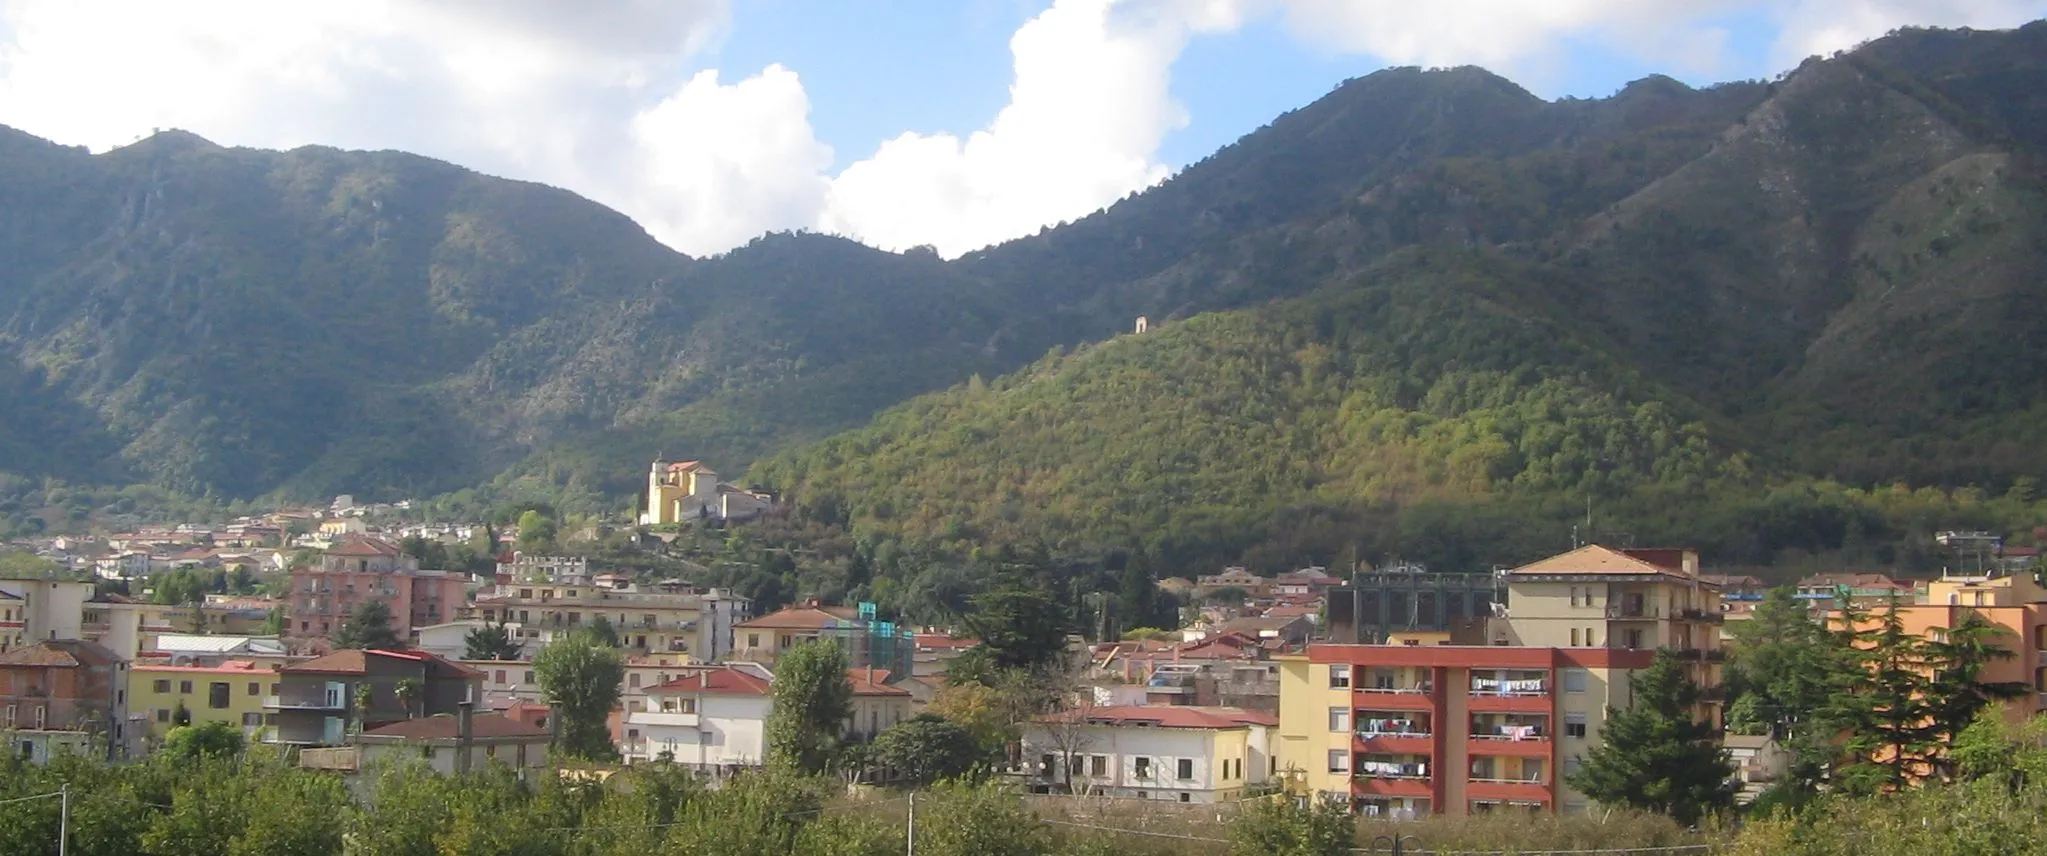 Photo showing: Panoramic view of Baronissi